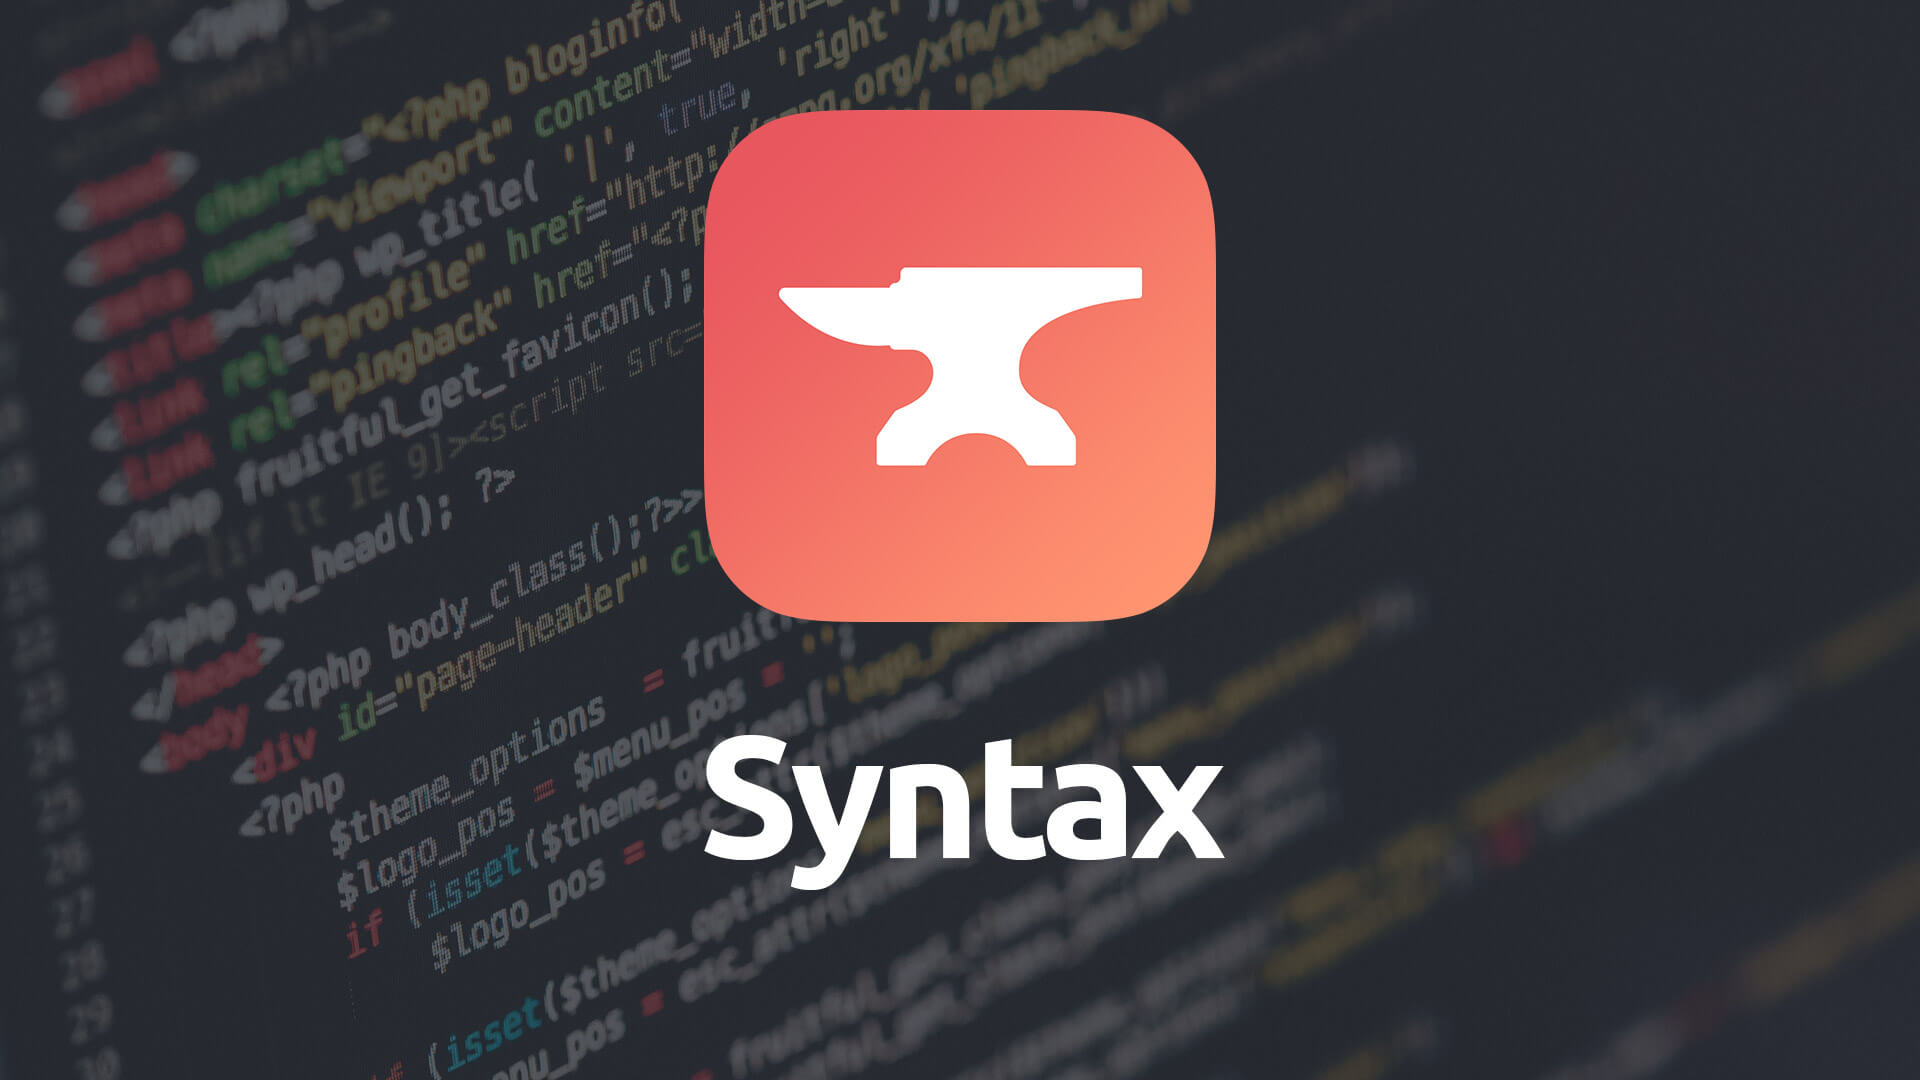 Using the Syntax Stack